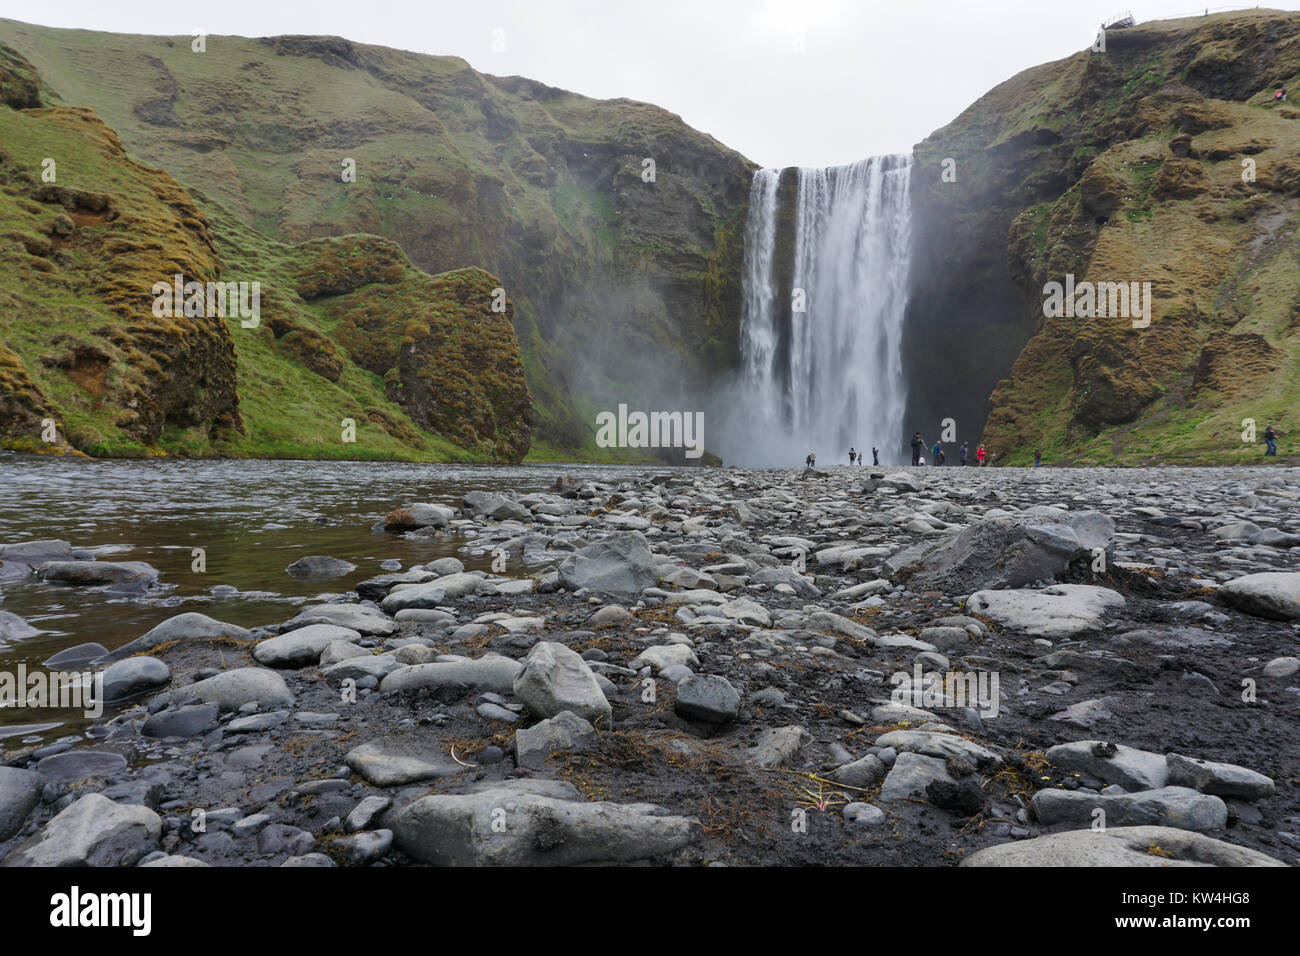 Low angle view of Skogafoss waterfall on the Skoga River in South Iceland. Stock Photo